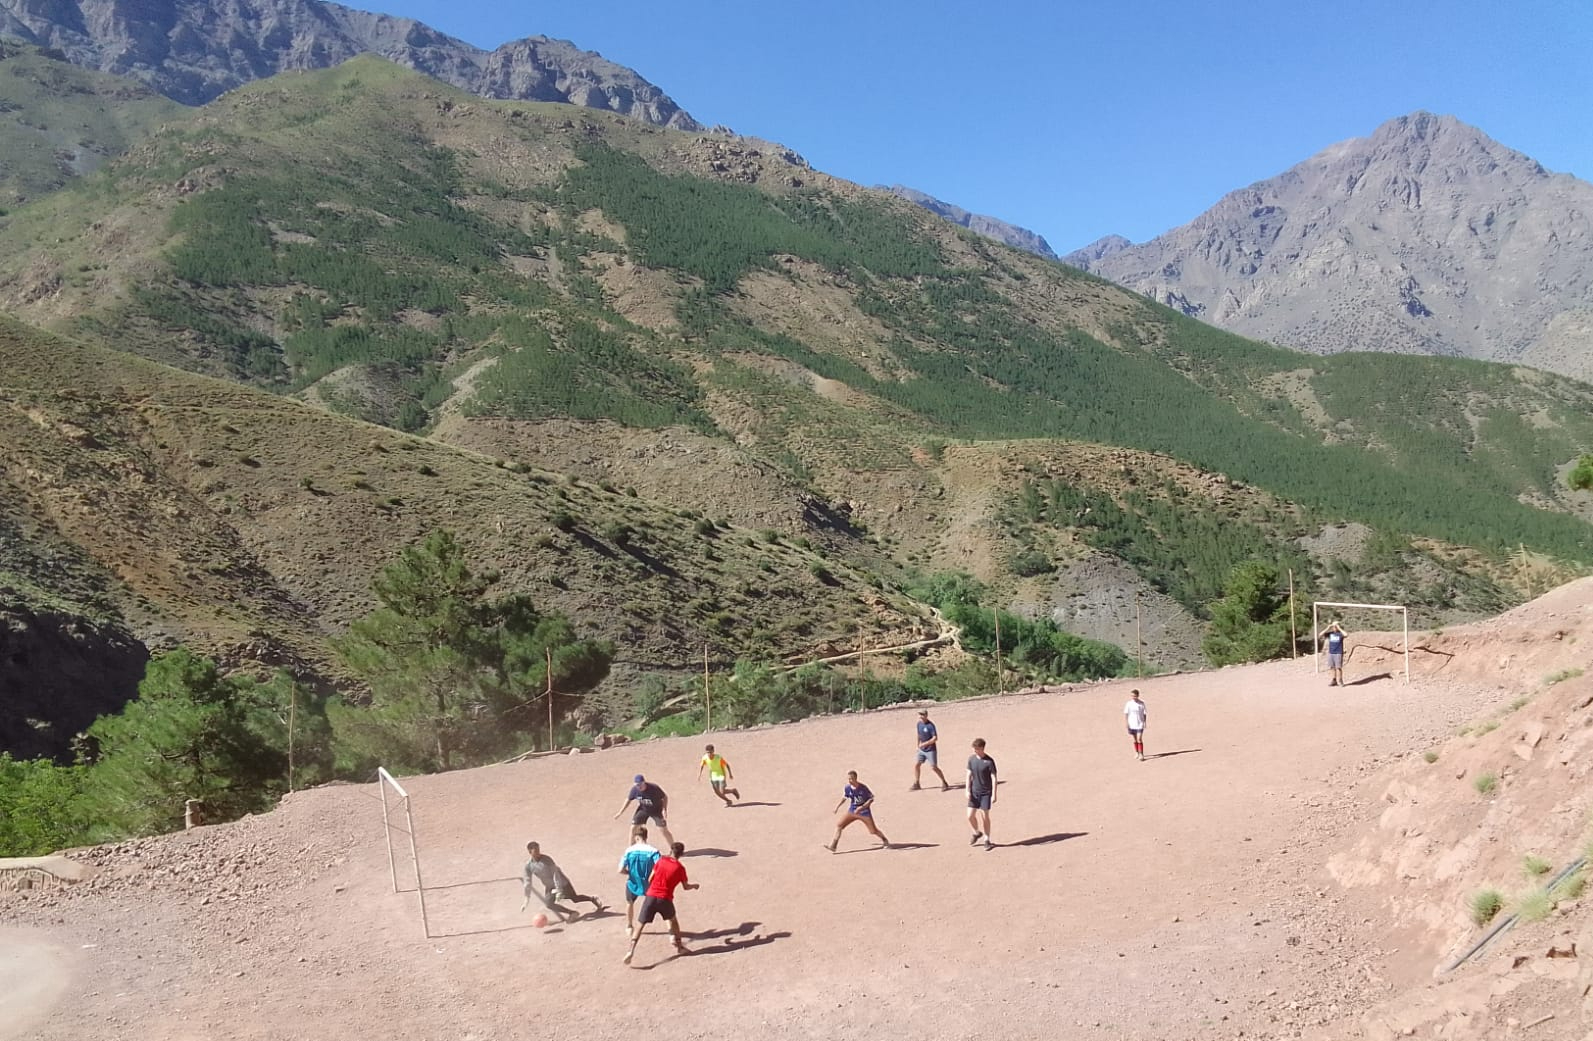 footballers playing on mountainside